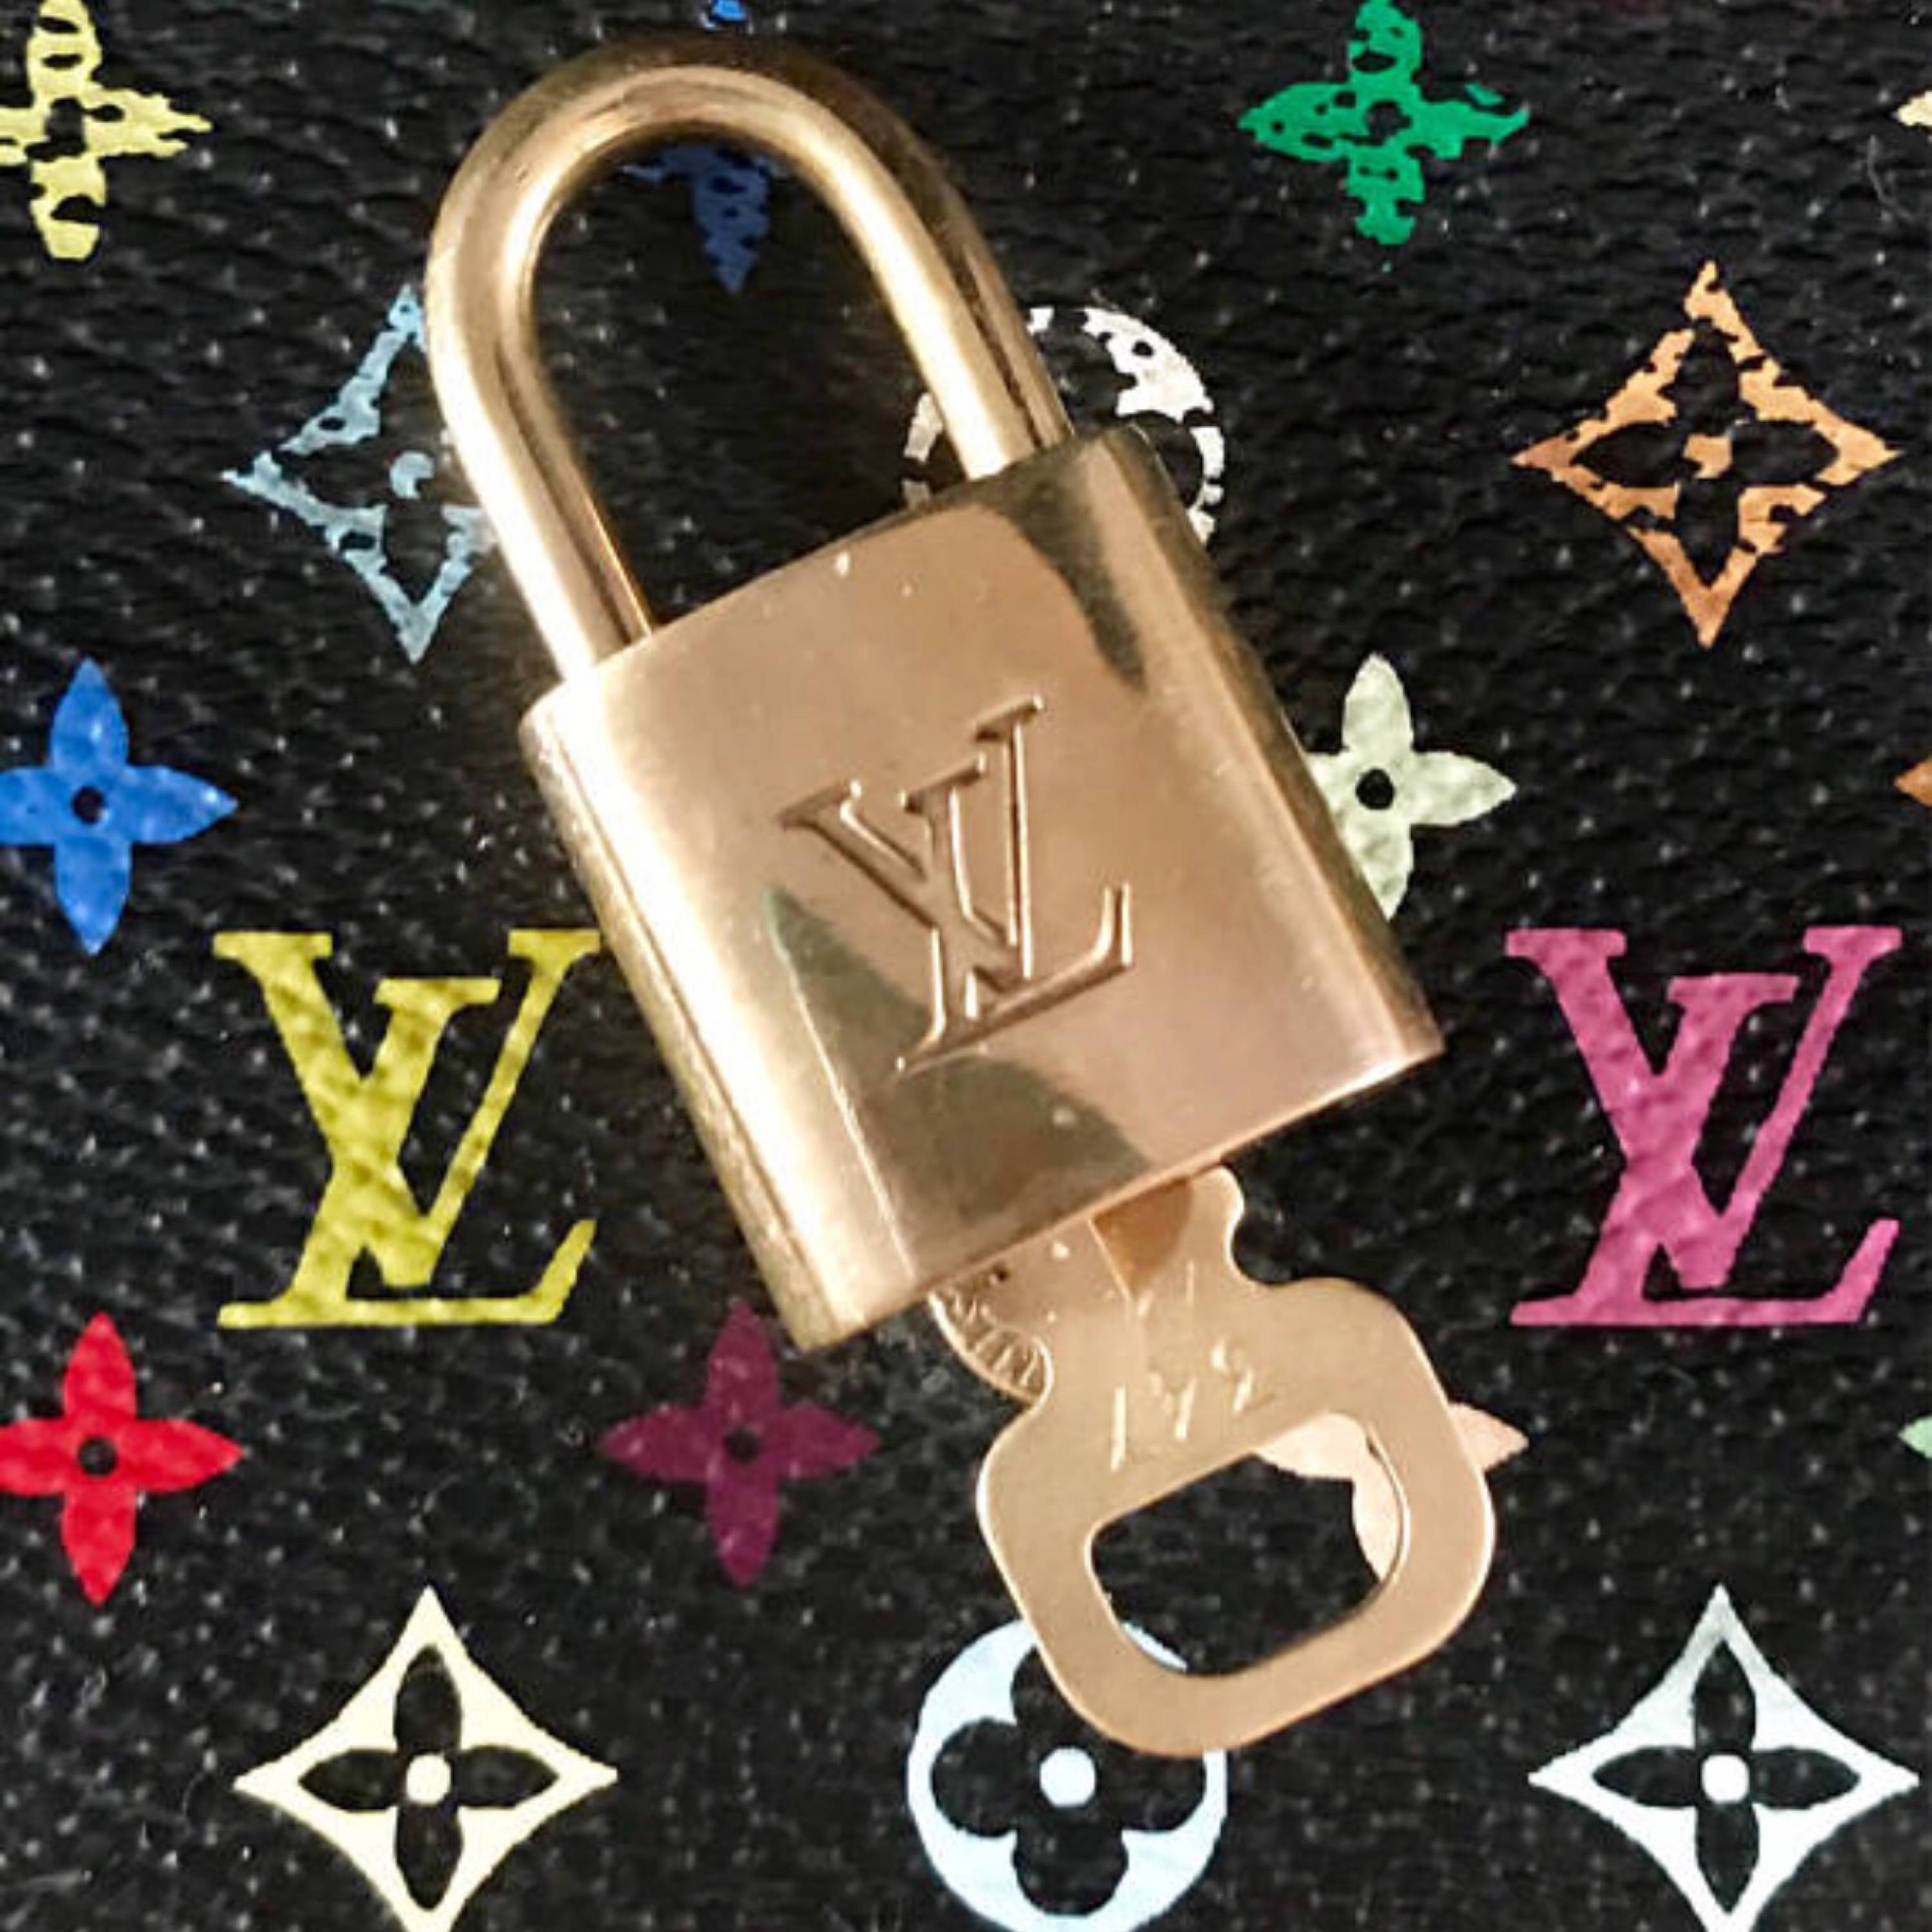 louis vuitton key and lock